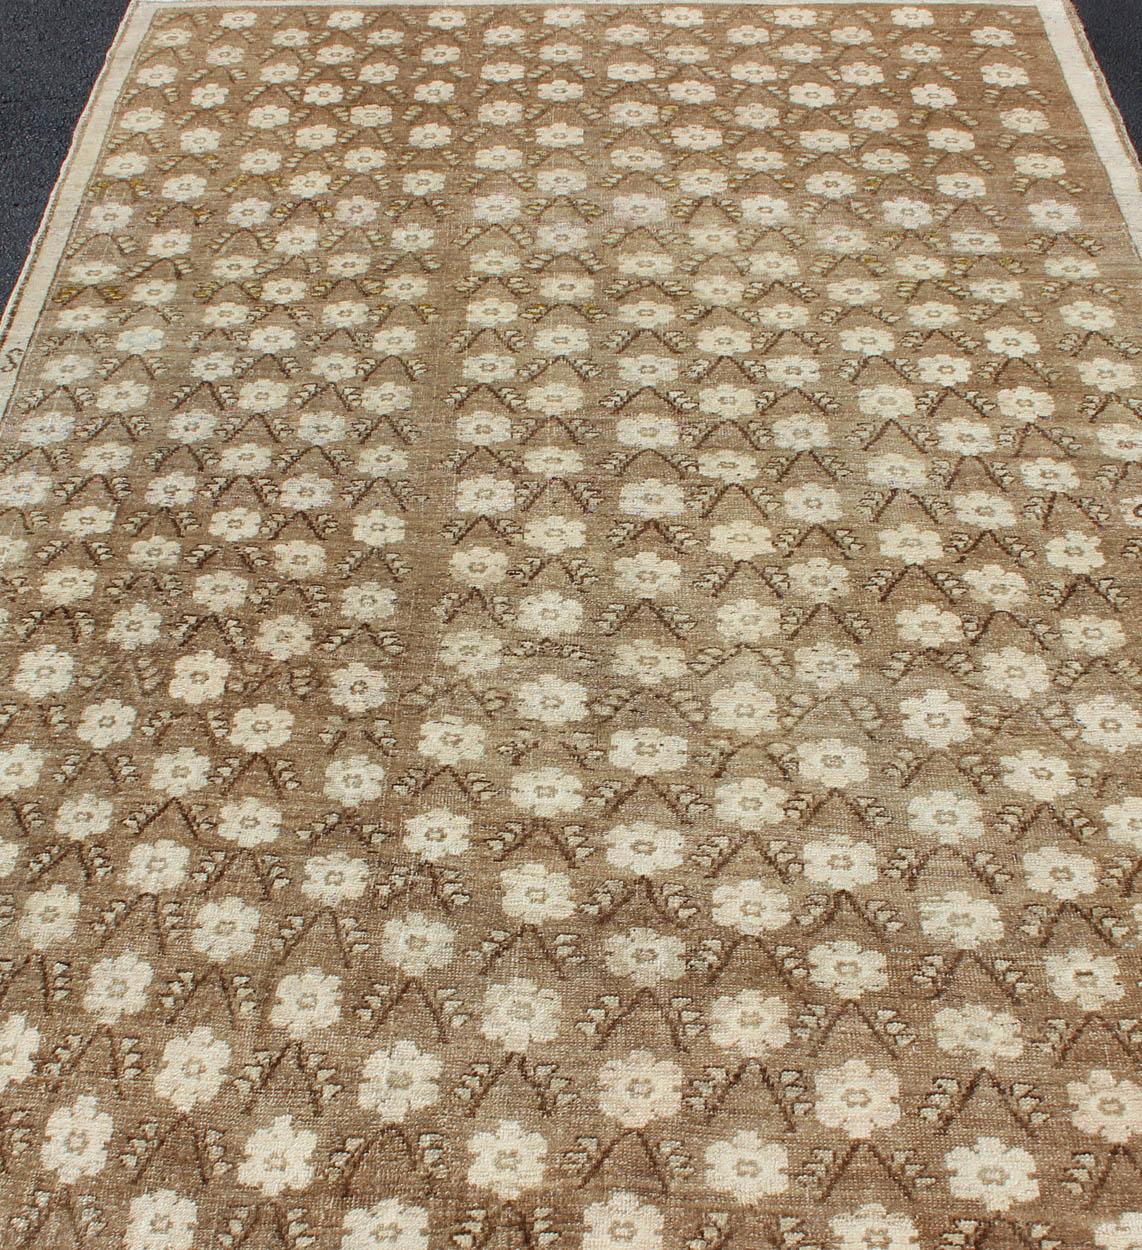 Striking 1940s Turkish Konya Rug with Flower Motifs in Brown and Cream For Sale 4